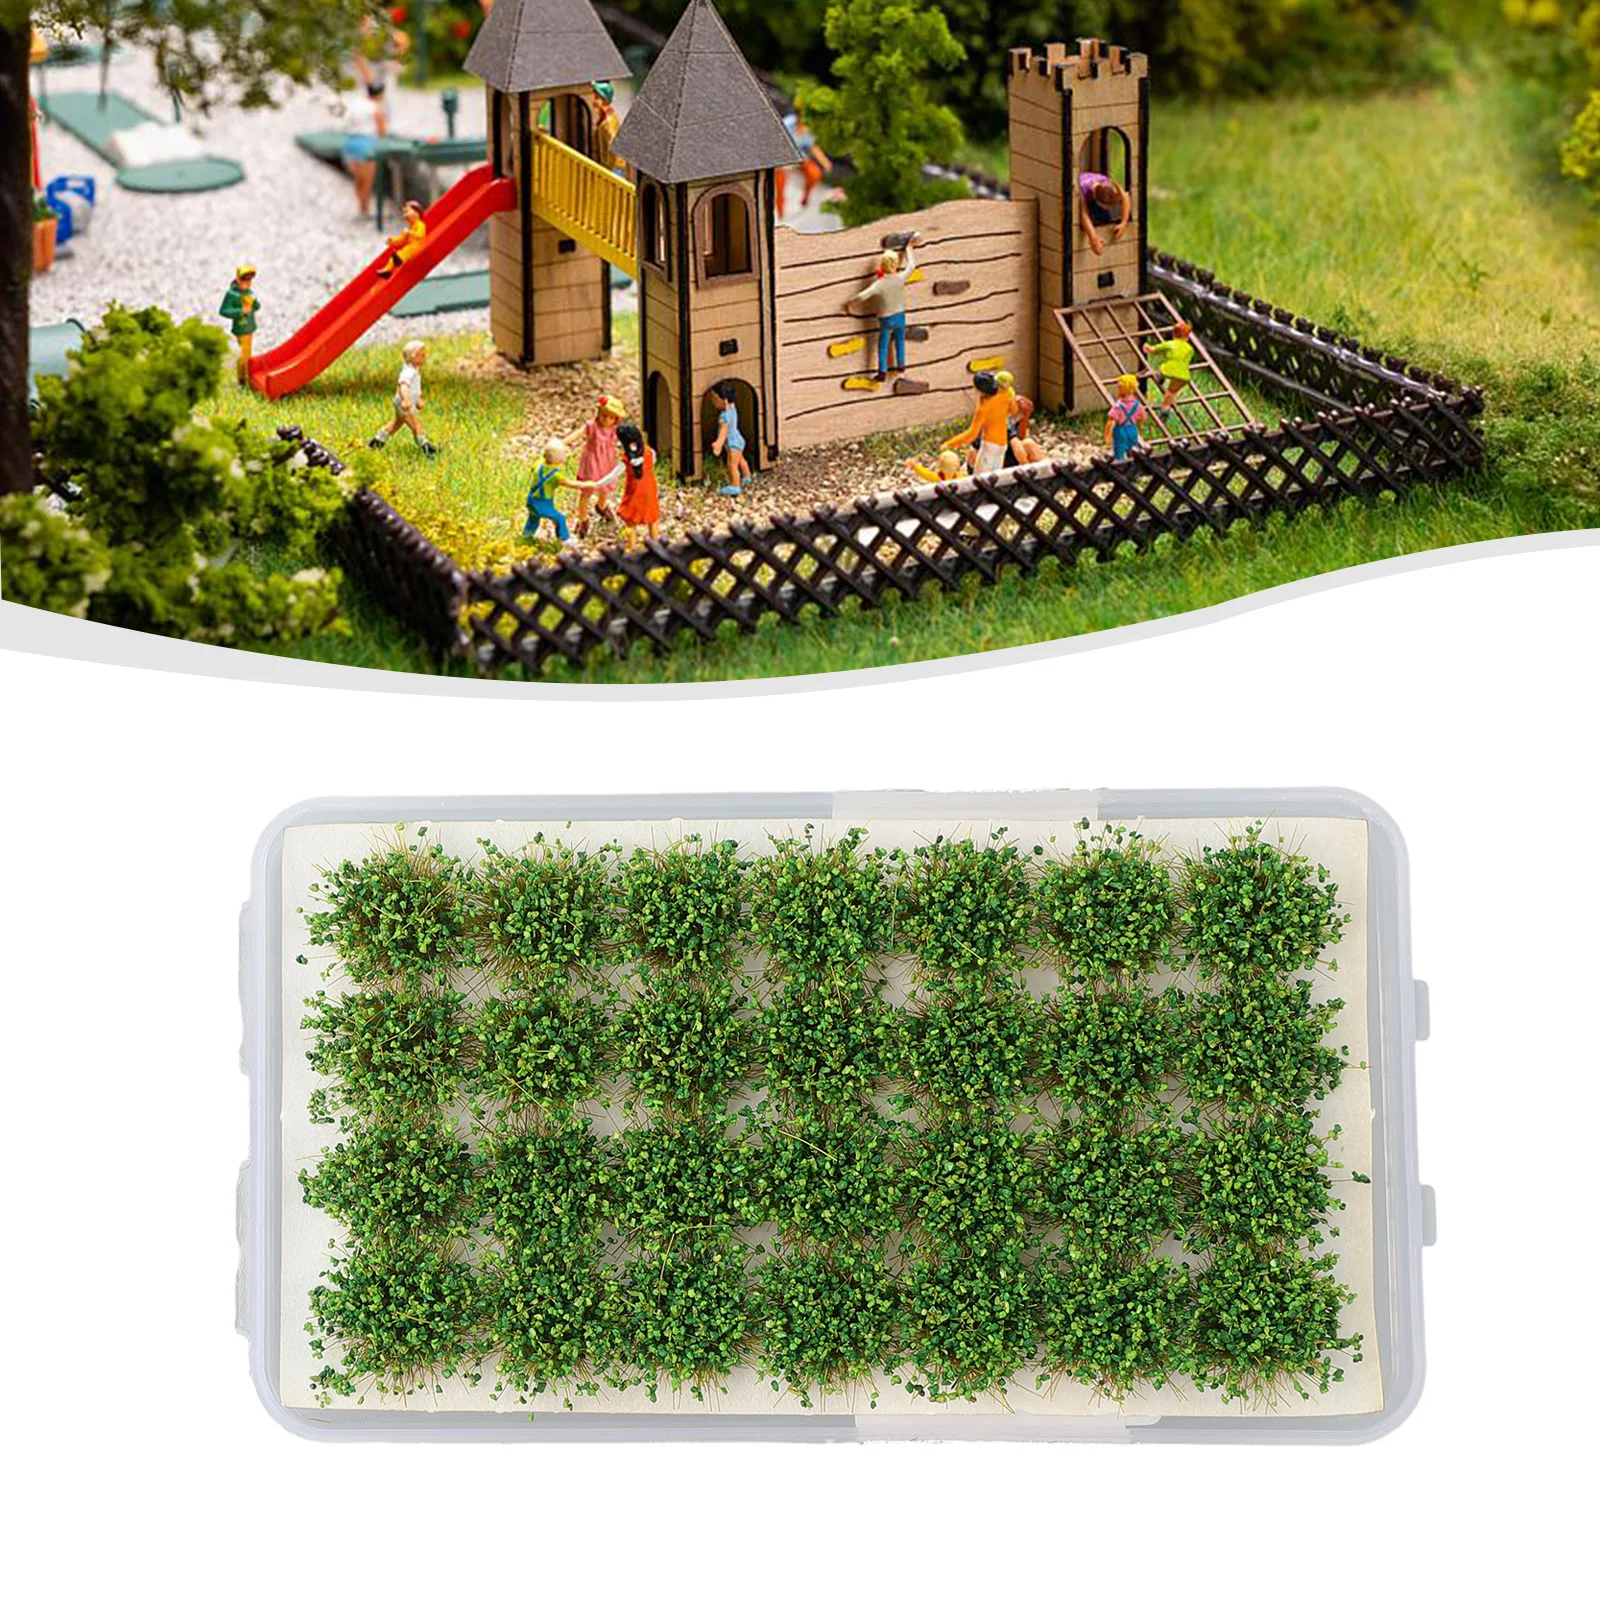 

Model Adhesive Static Grass Tufts Military Models Miniature Scenery Scene Grass Cluster Soldiers Train Models Indoor